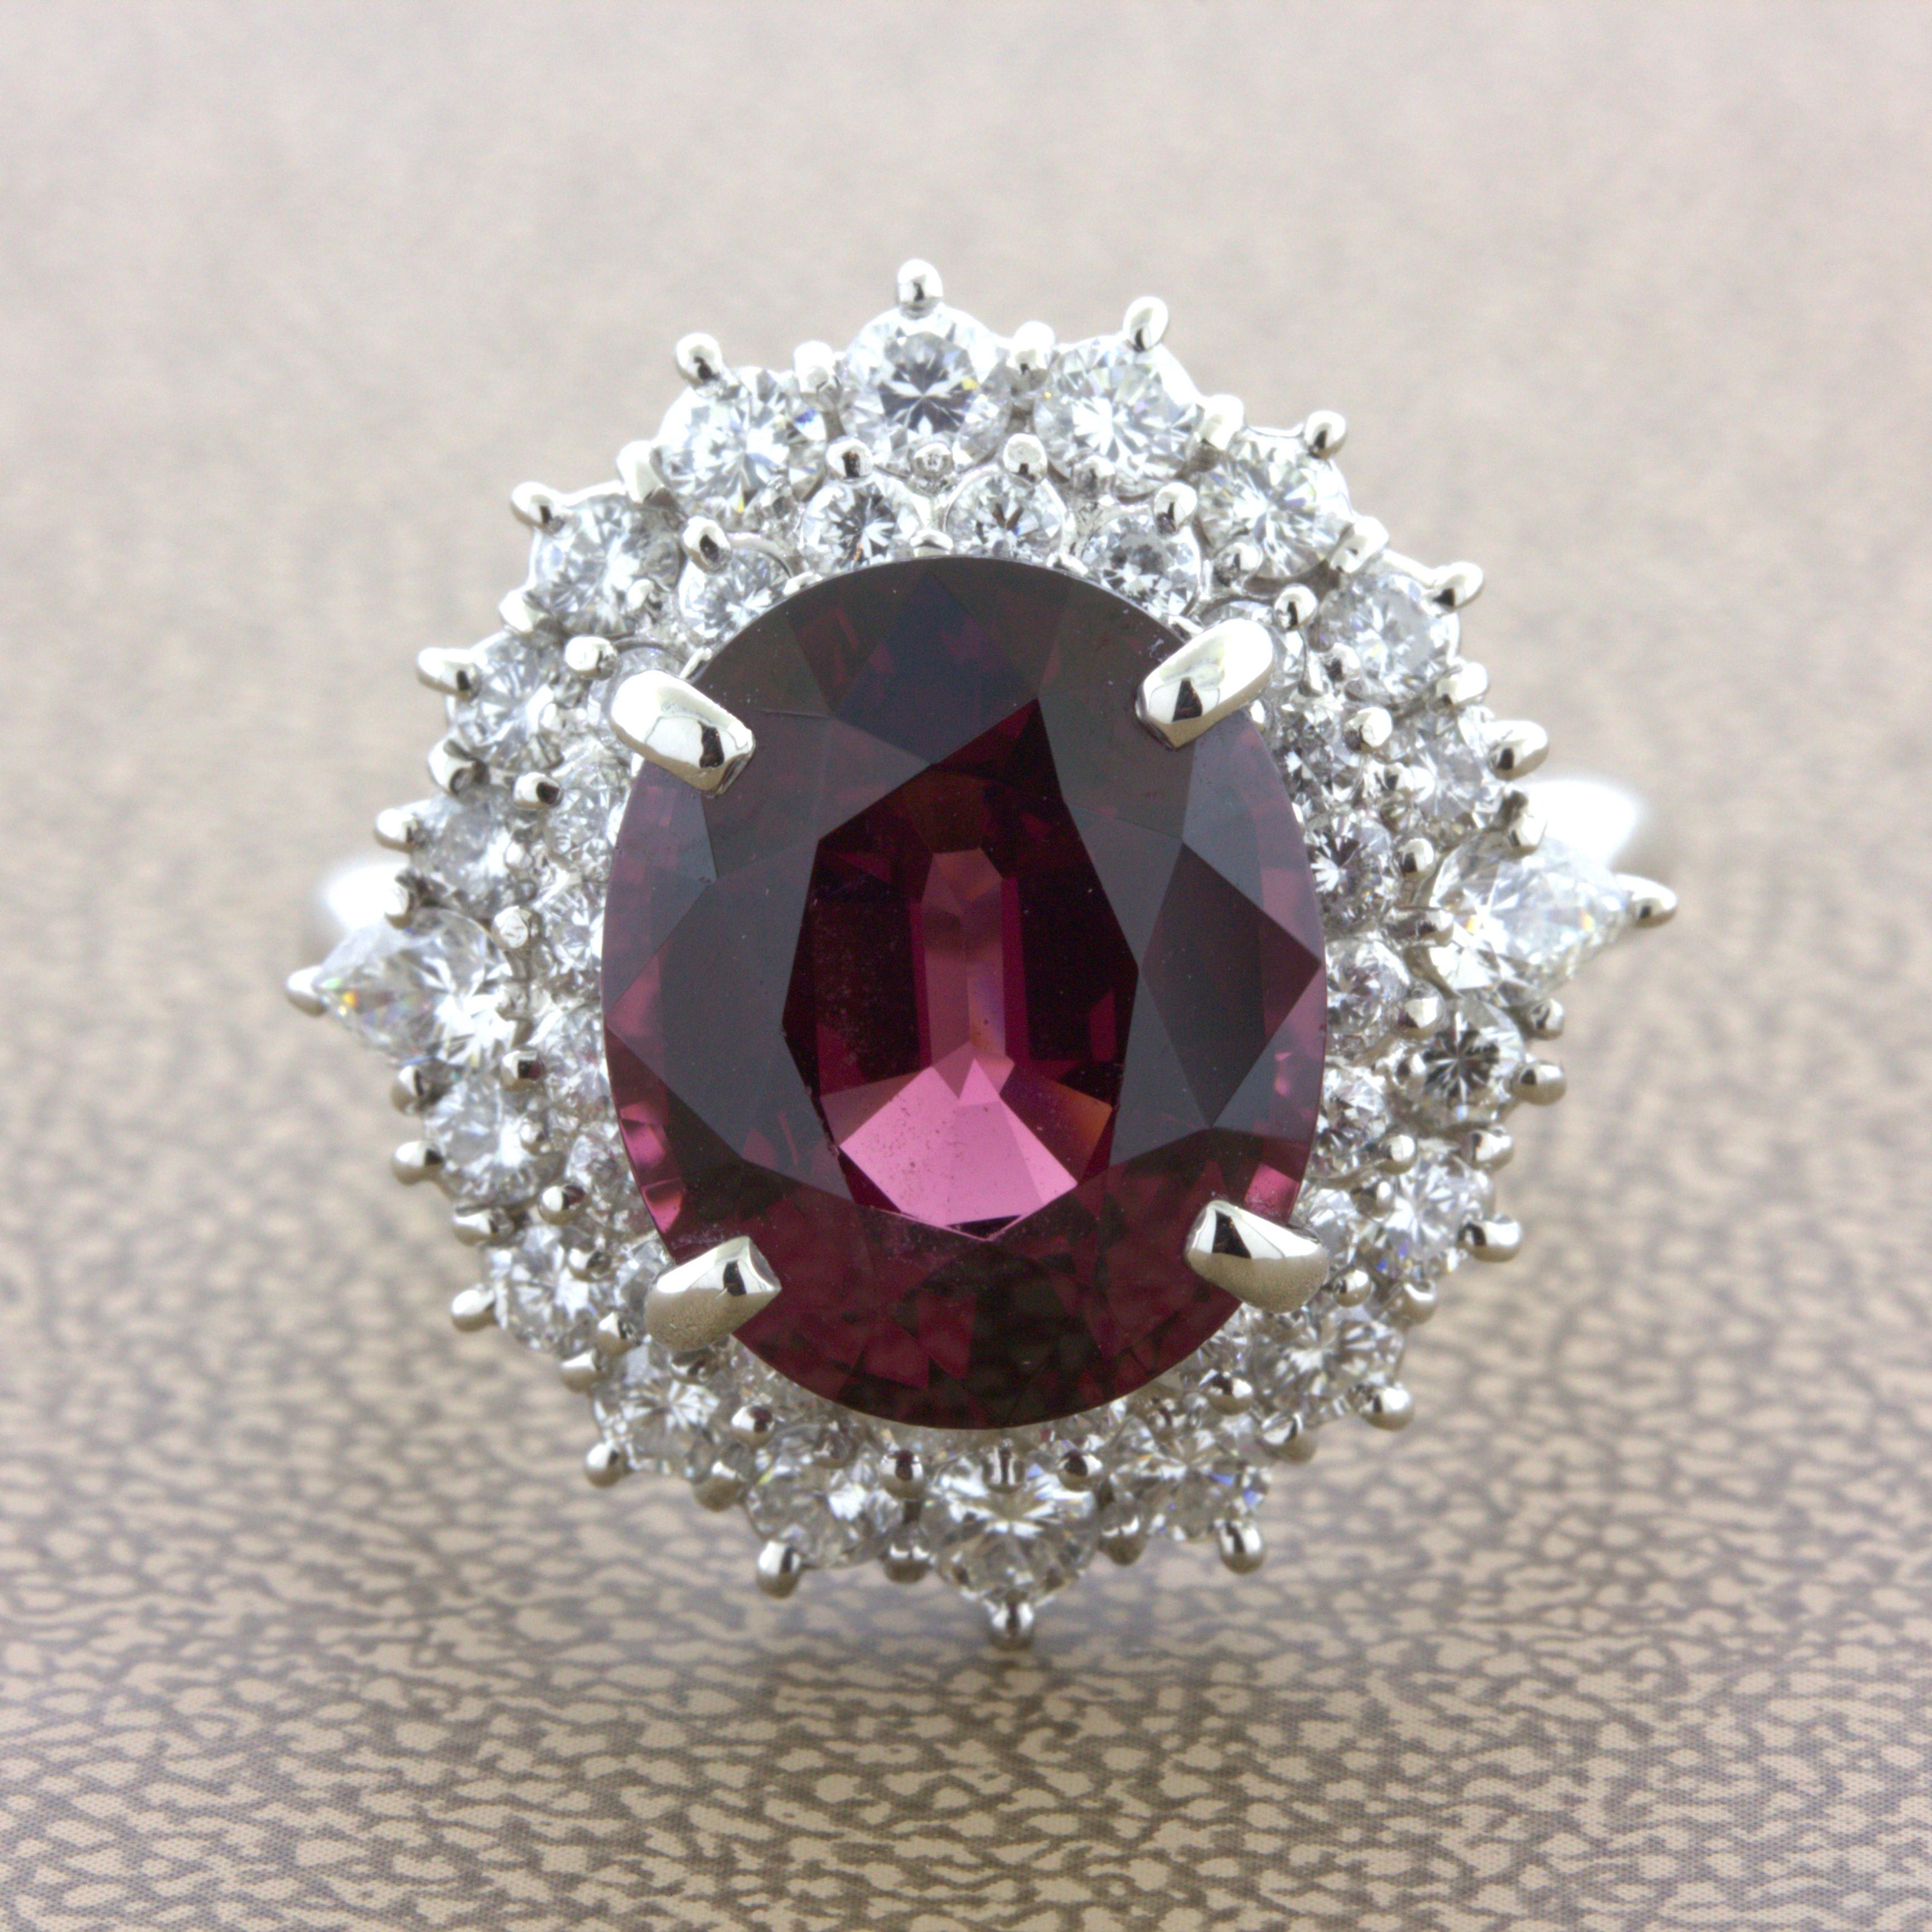 A super gem garnet, rhodolite variety, takes center stage! It weighs an impressive 8.16 carat and has an intense rich red color with secondary purple color making the stone glow. It is complemented by 1.58 carats of round brilliant-cut diamonds